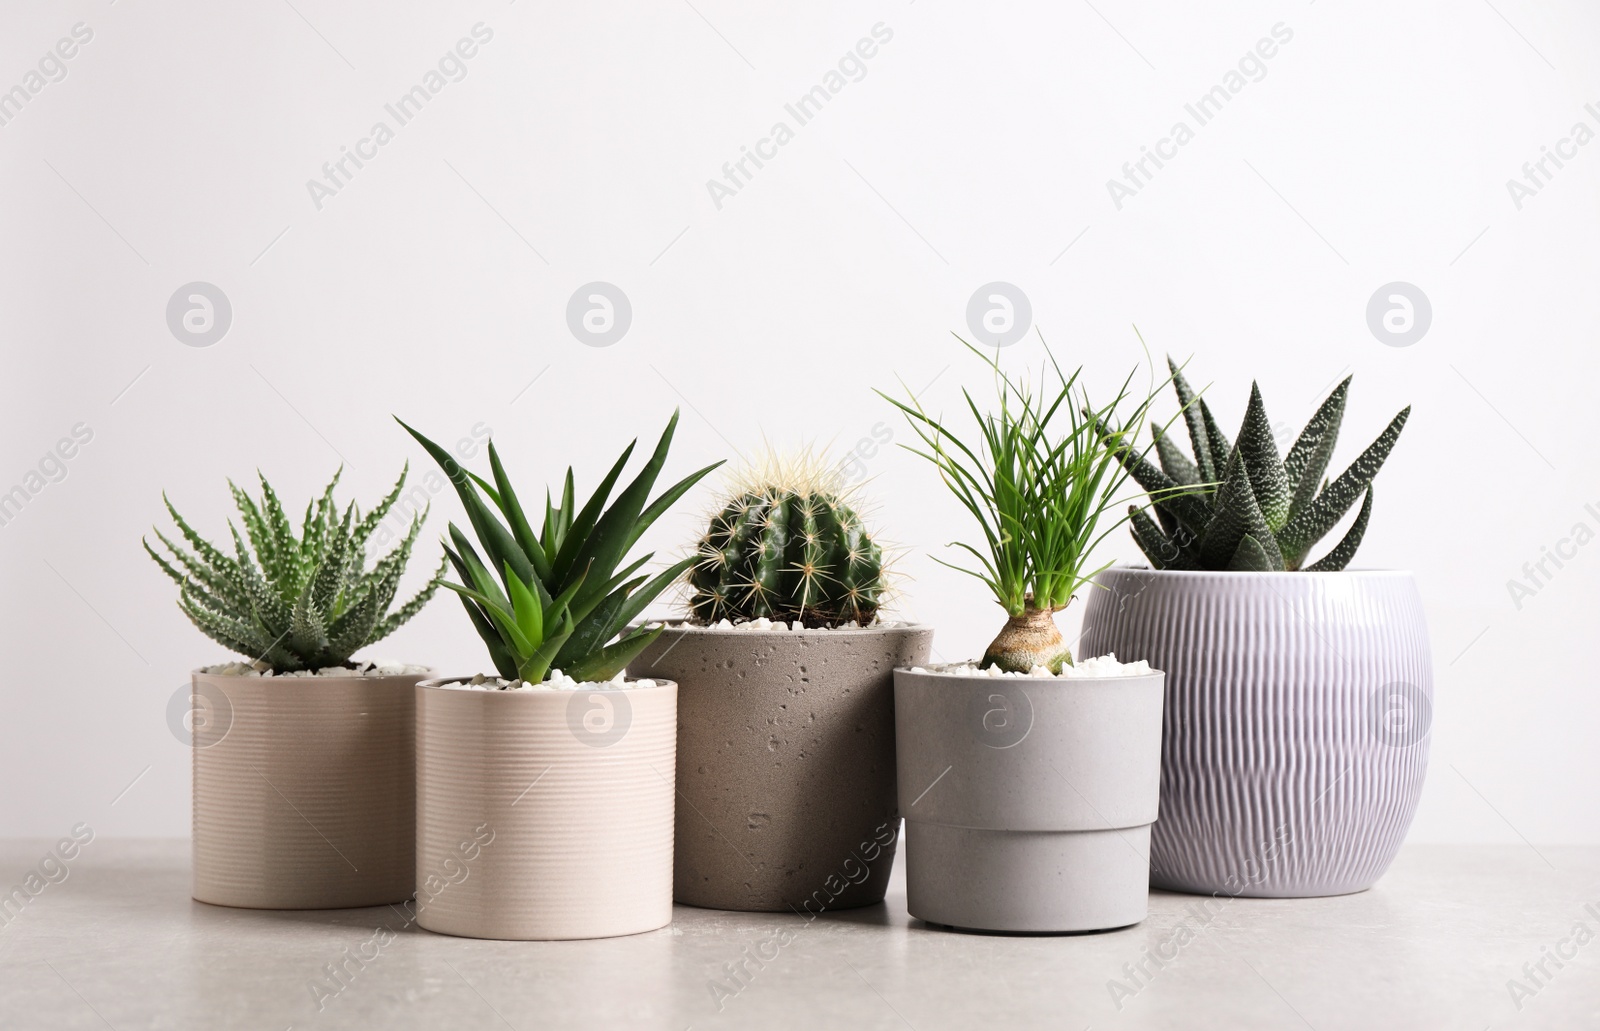 Photo of Different house plants in pots on grey table against white background